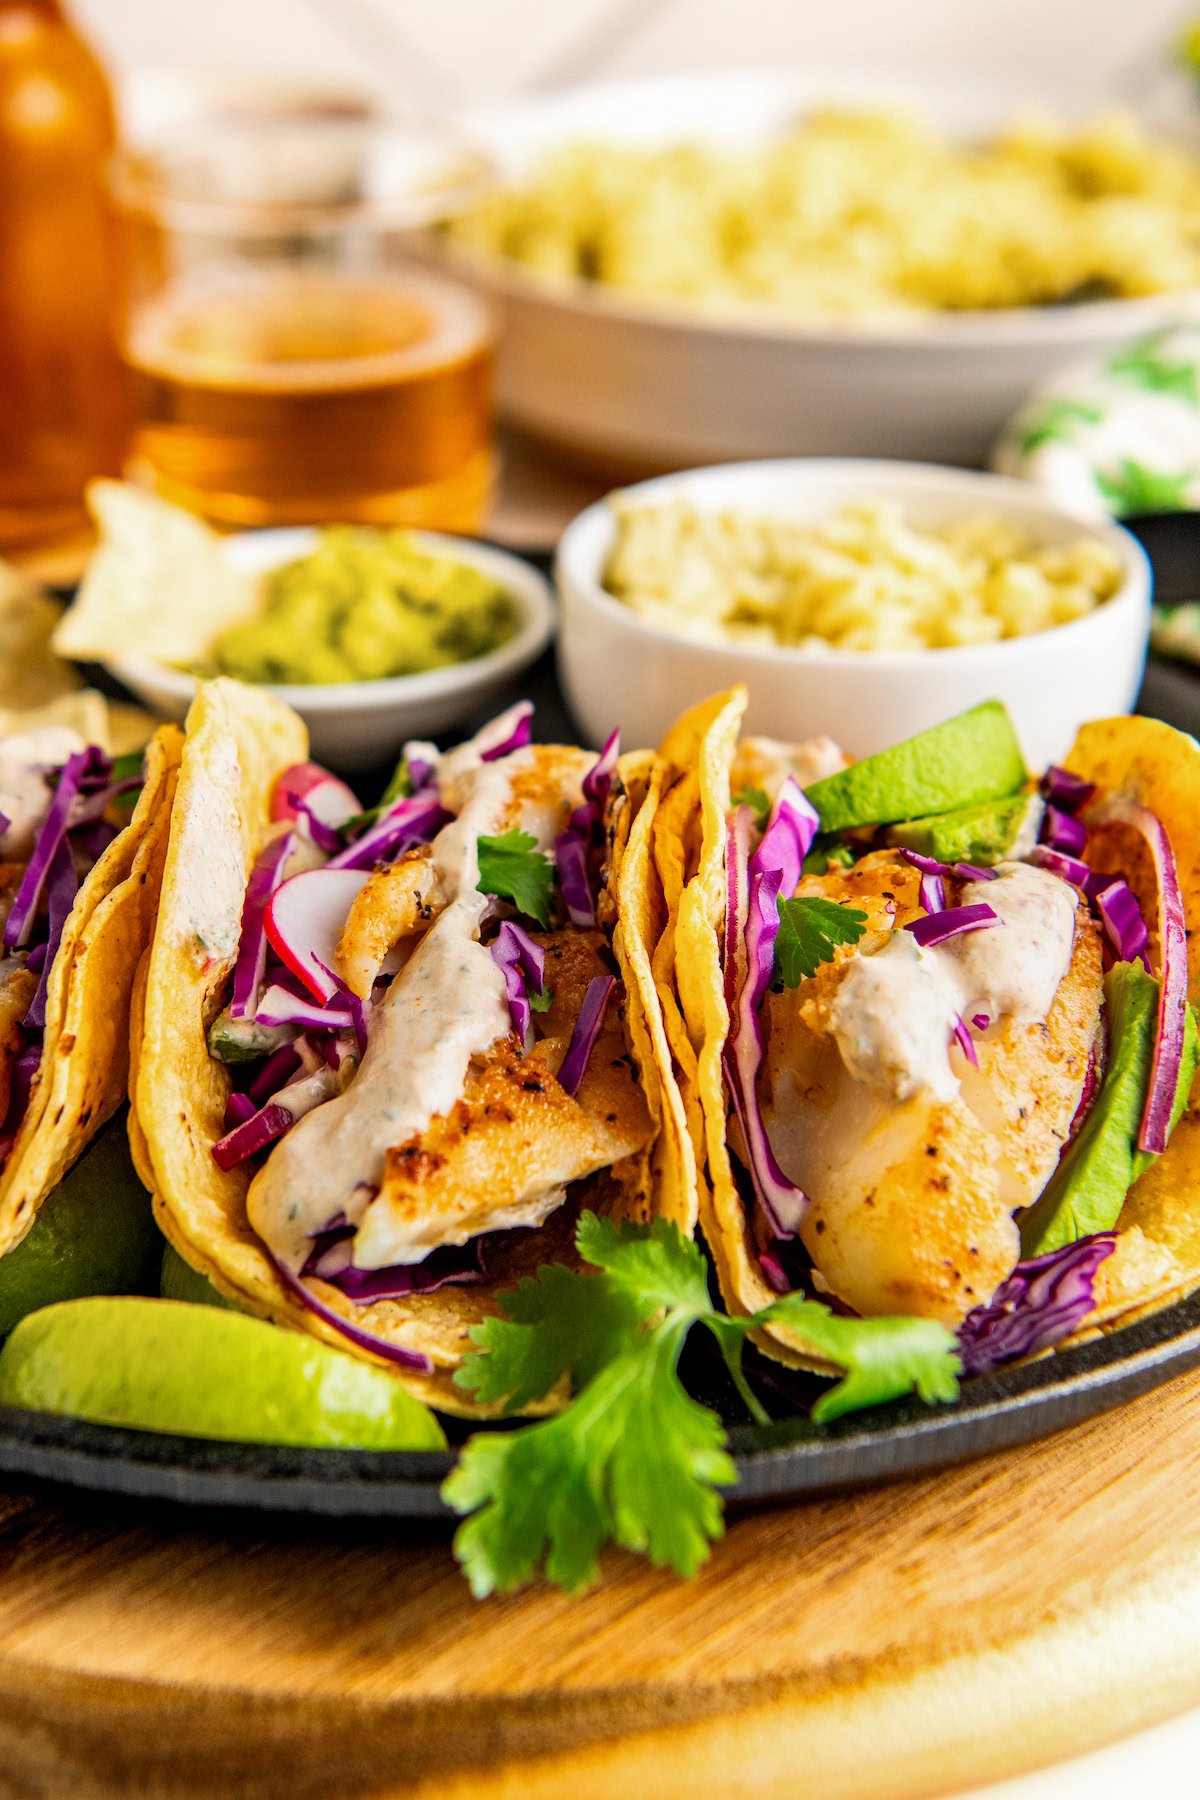 Prepared easy fish tacos with avocado, radishes, cabbage, and a creamy fish taco sauce. 